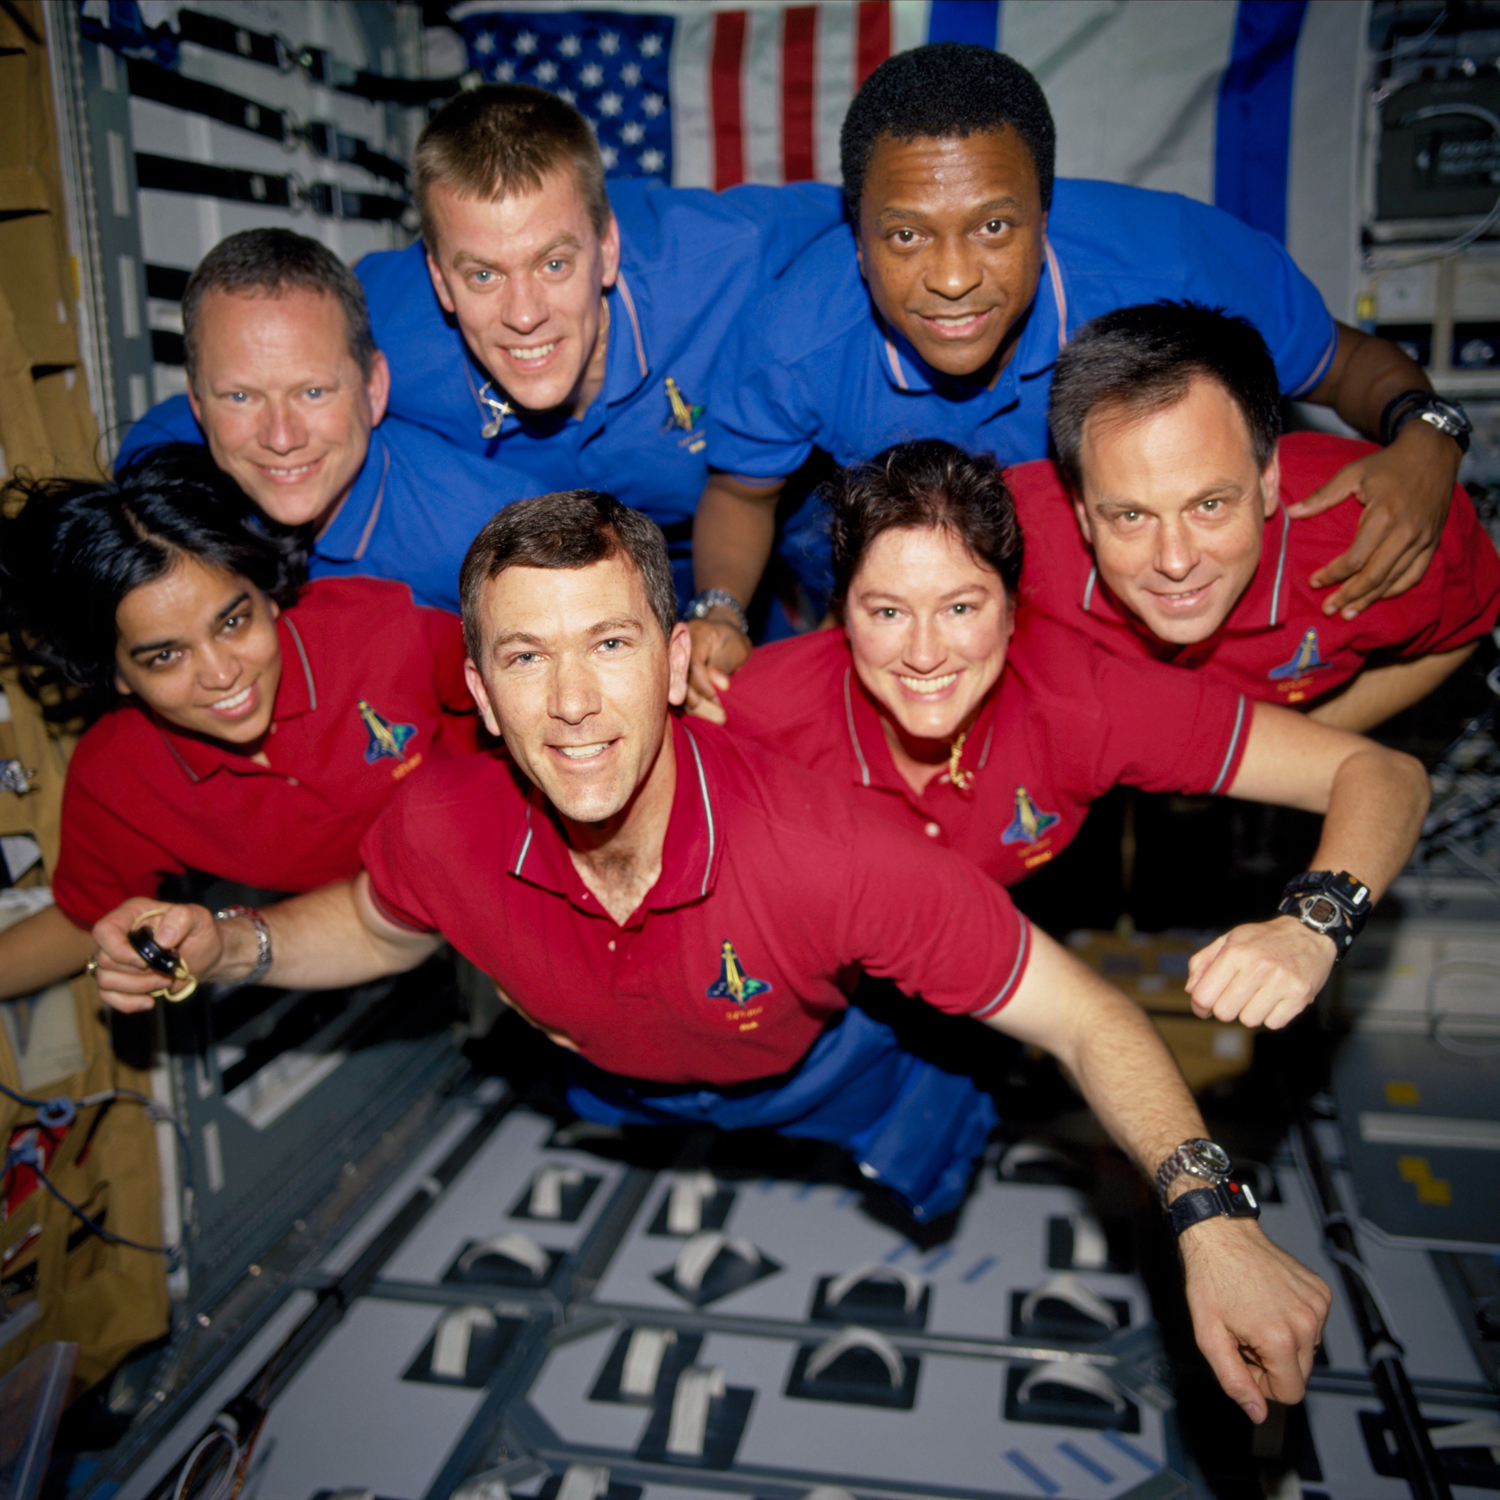 group of astronauts floating together in shirtsleeves